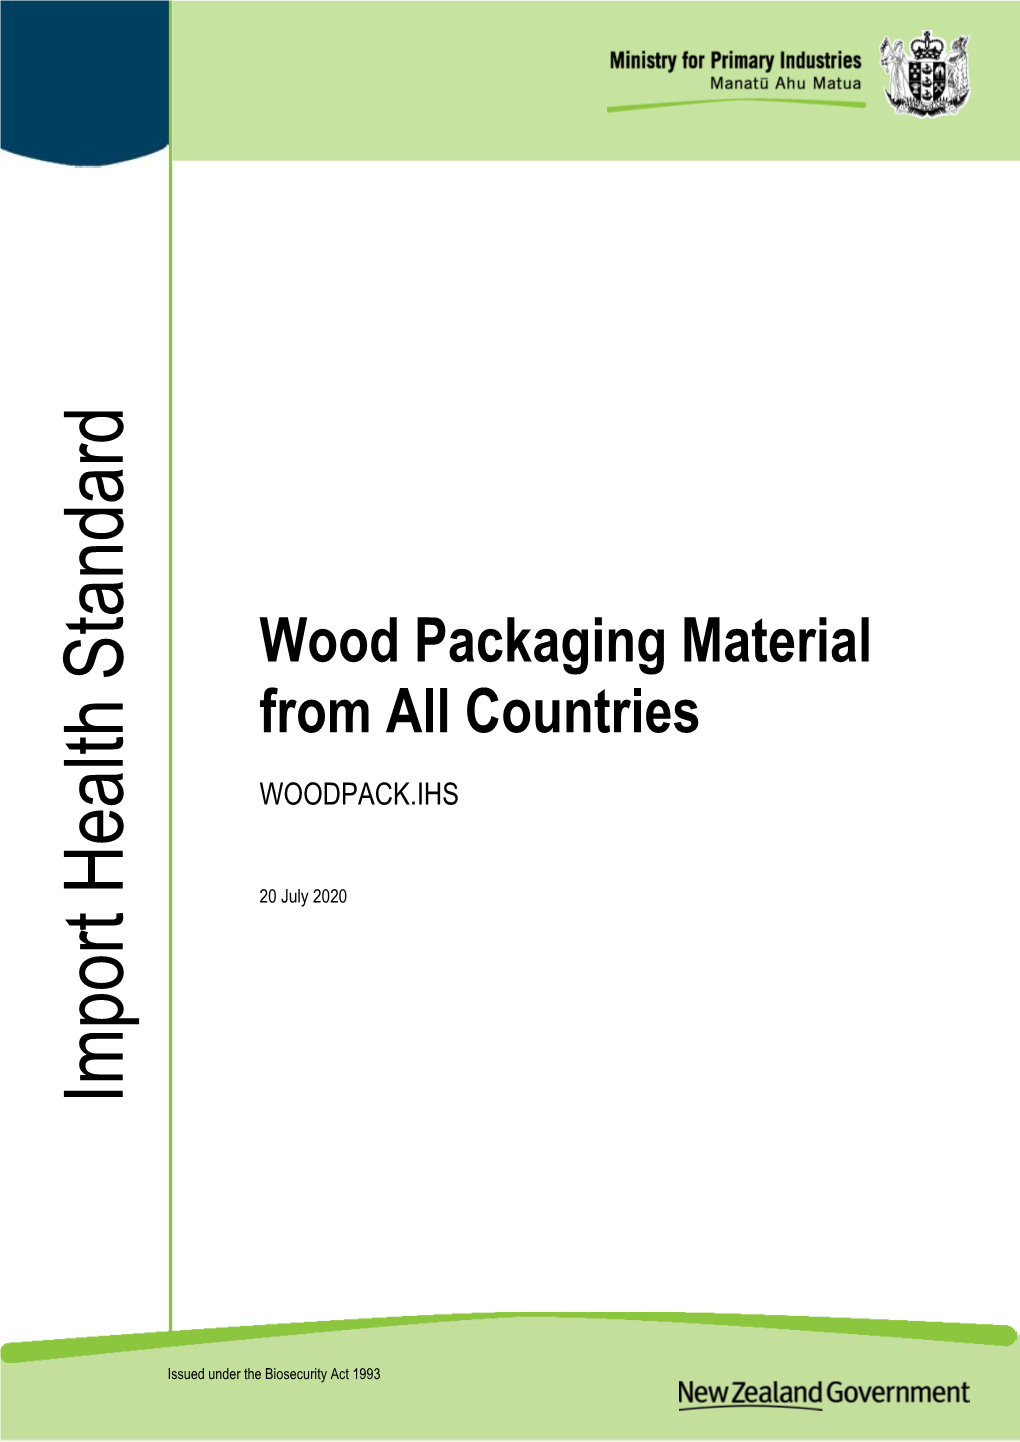 Wood Packaging Material from All Countries 20 July 2020